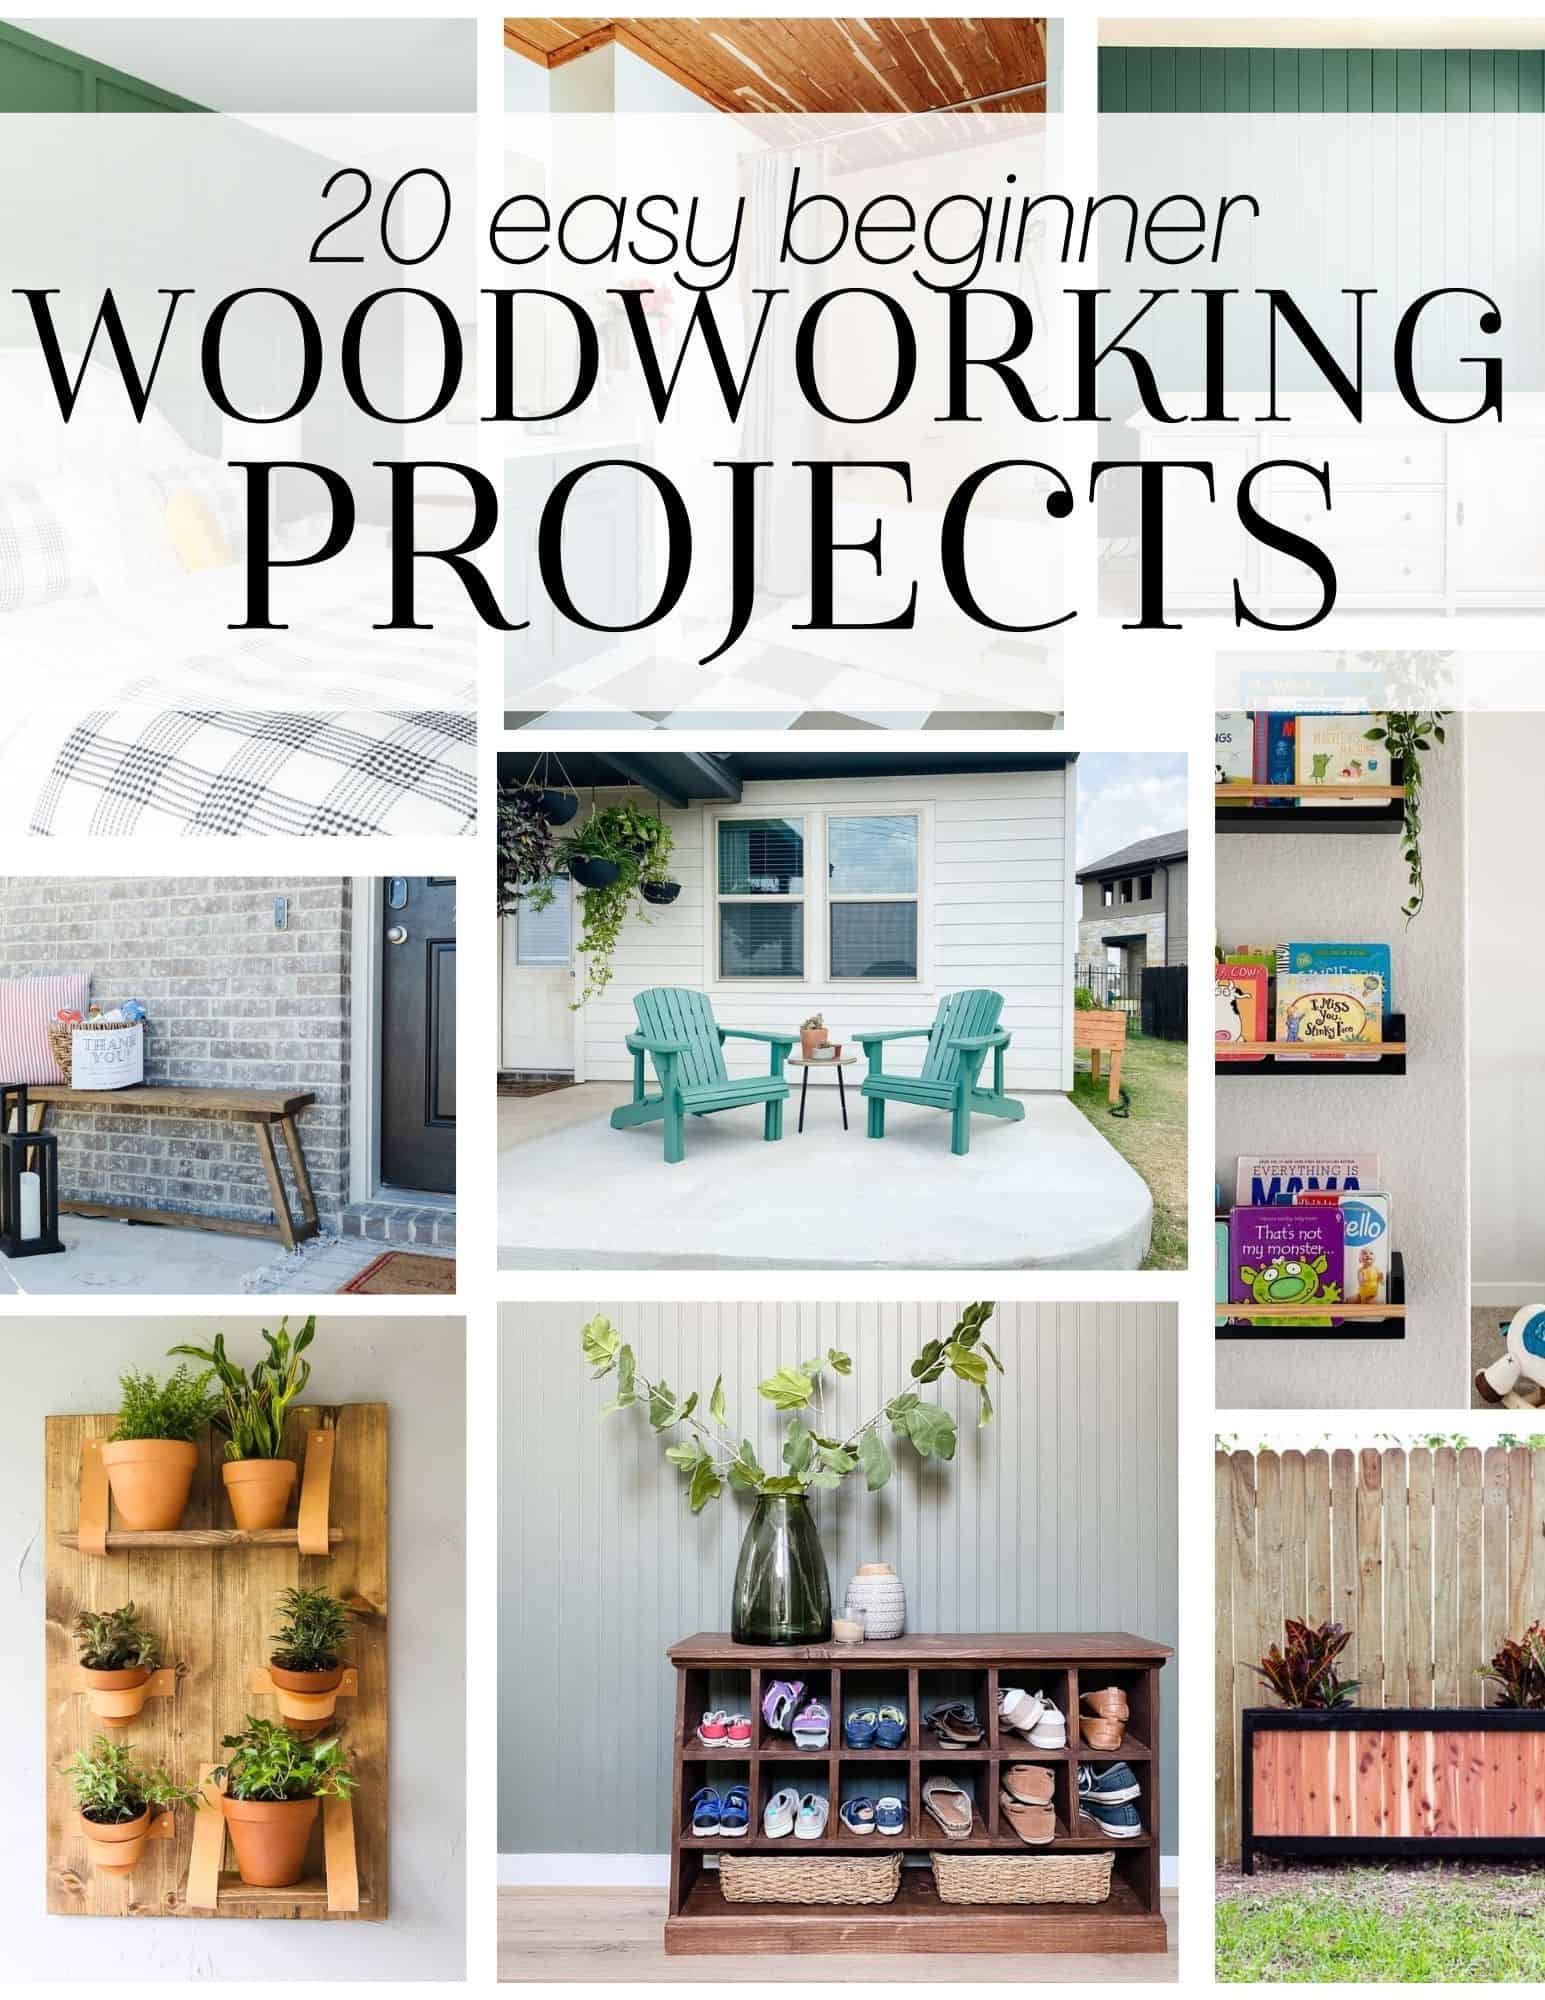 Best DIY Woodworking Plans To Make Amazing Christmas Gifts  Simple  woodworking plans, Easy woodworking projects, Woodworking plans diy